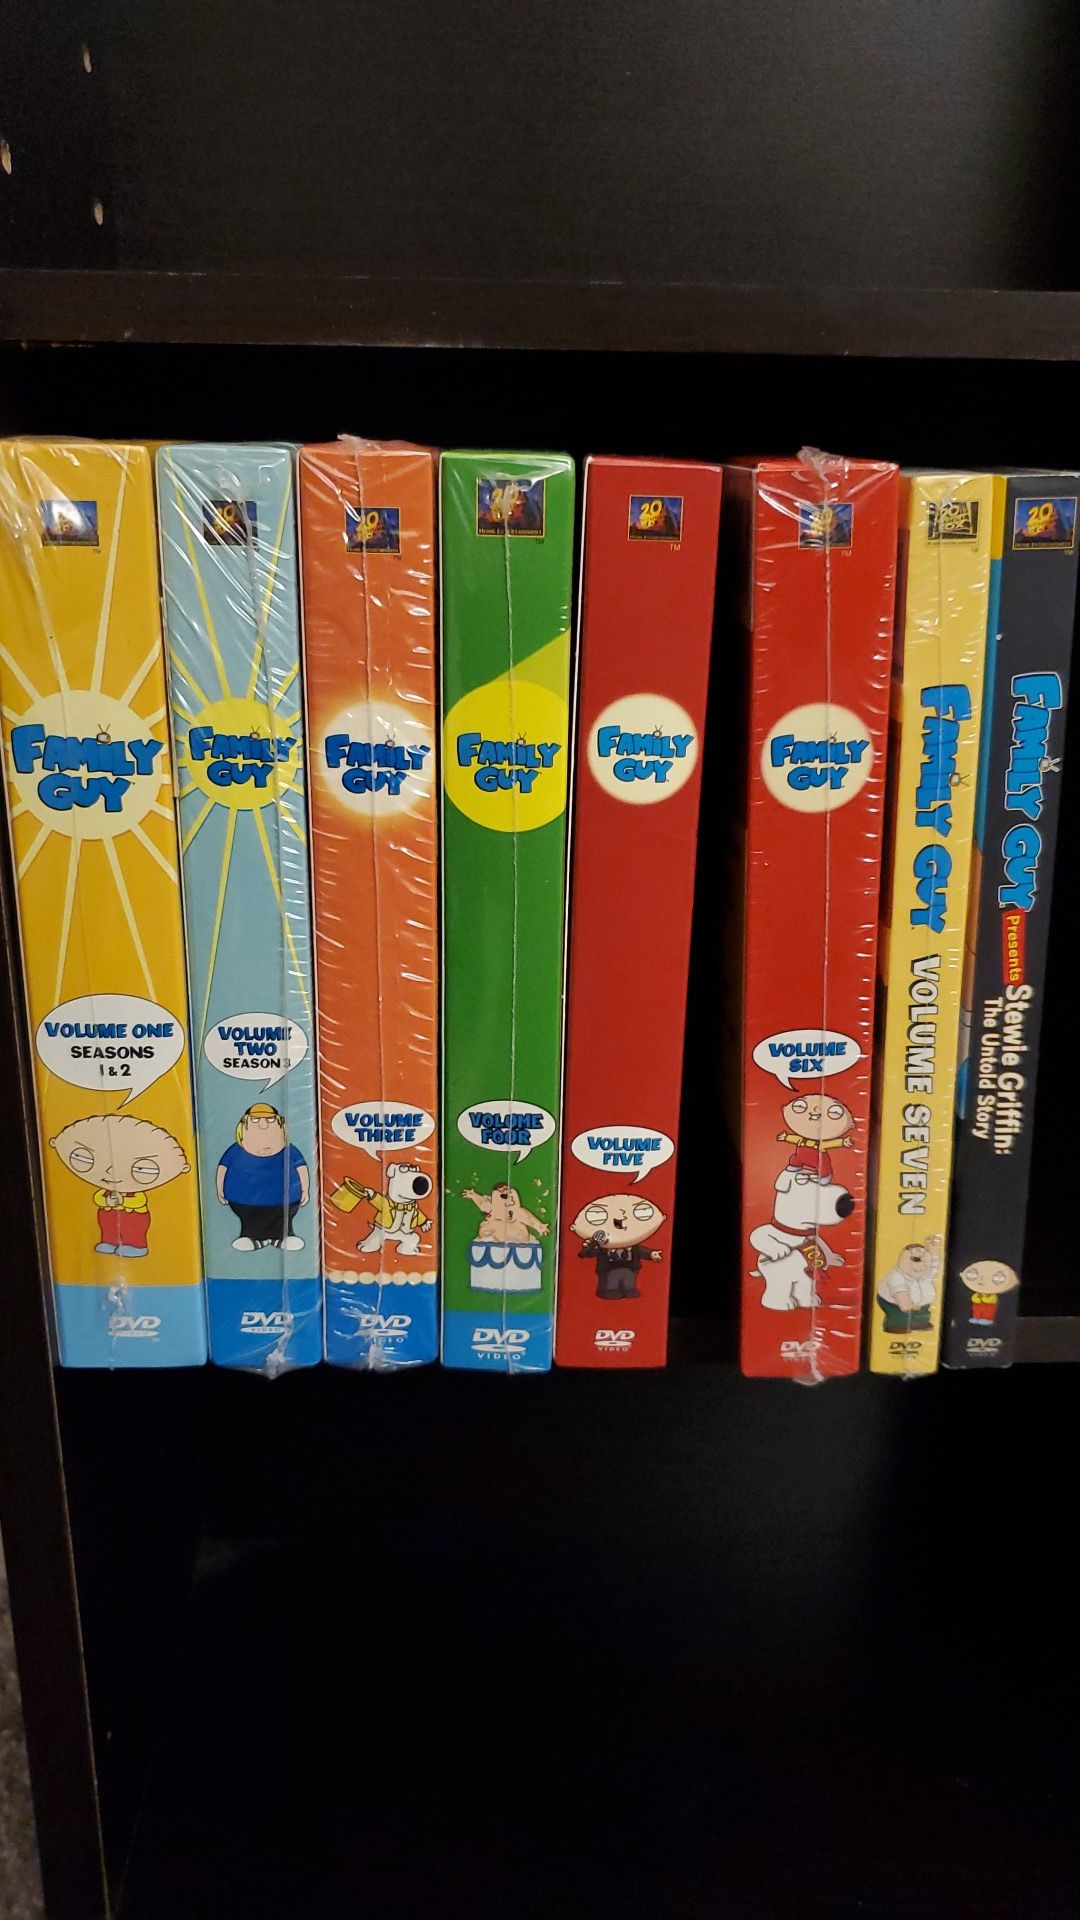 Family Guy Volumes 1-7 and Stewie Movie DVD's